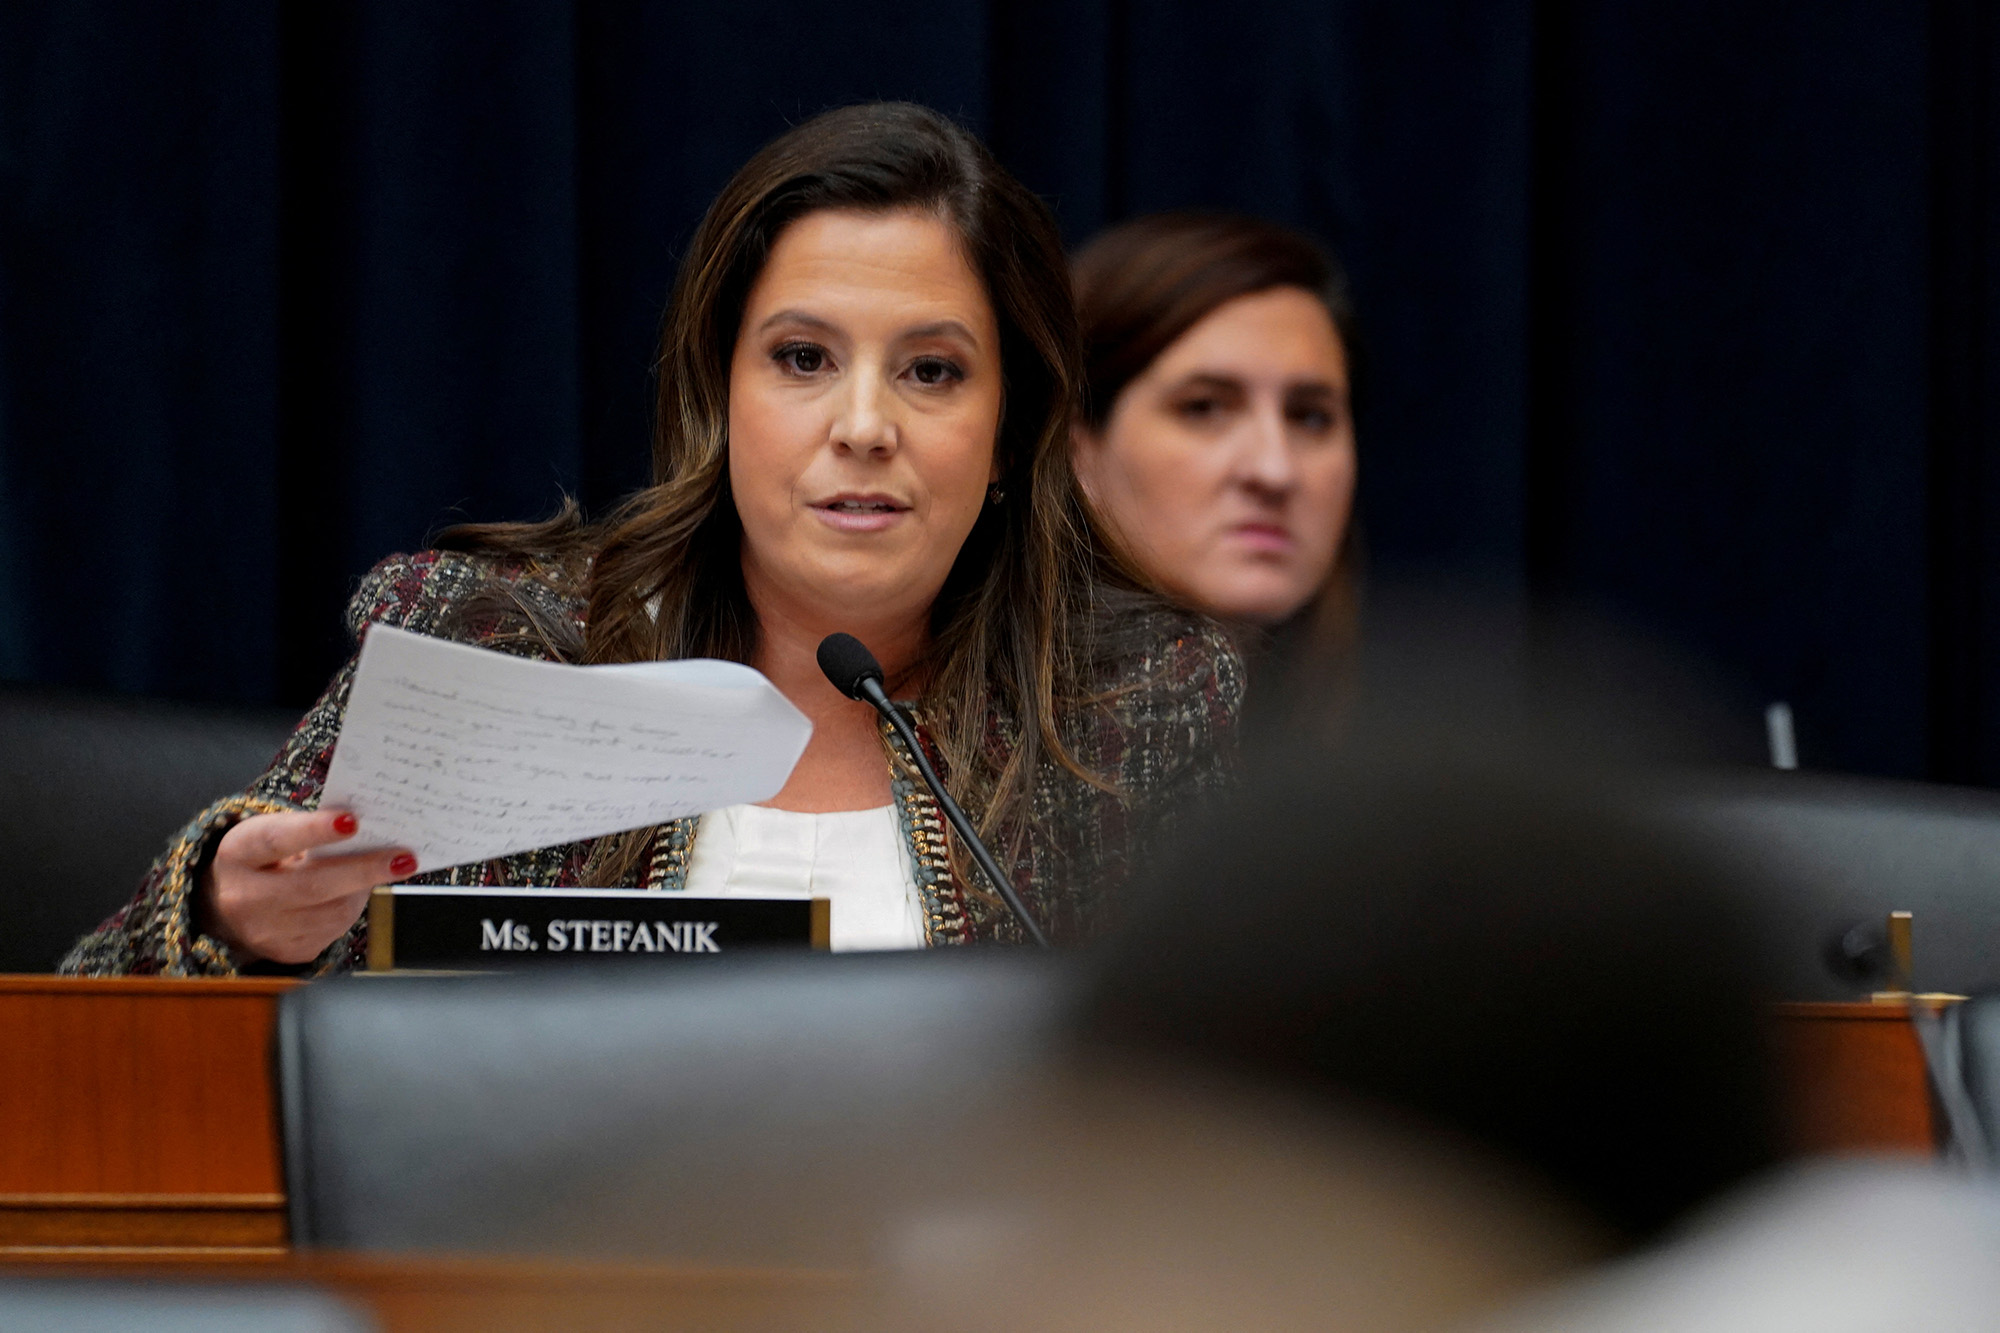 U.S. Representative Elise Stefanik (R-NY) speaks during a House Education and The Workforce Committee hearing titled "Holding Campus Leaders Accountable and Confronting Antisemitism" on Capitol Hill in Washington, on December 5.